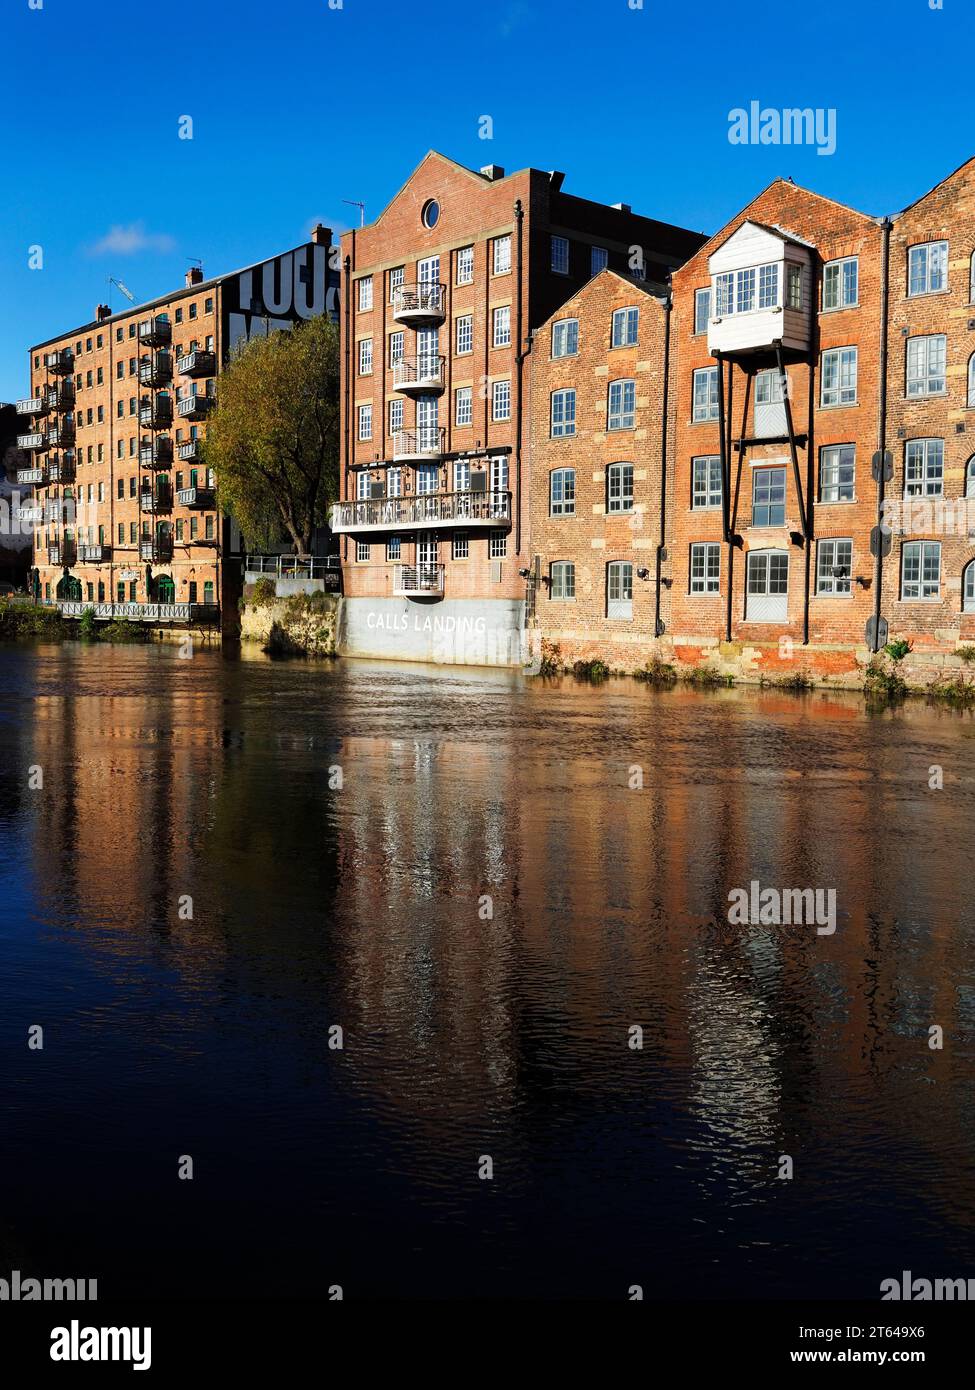 Former warehouses along the River Aire at Calls Landing in Leeds West Yorkshire England Stock Photo